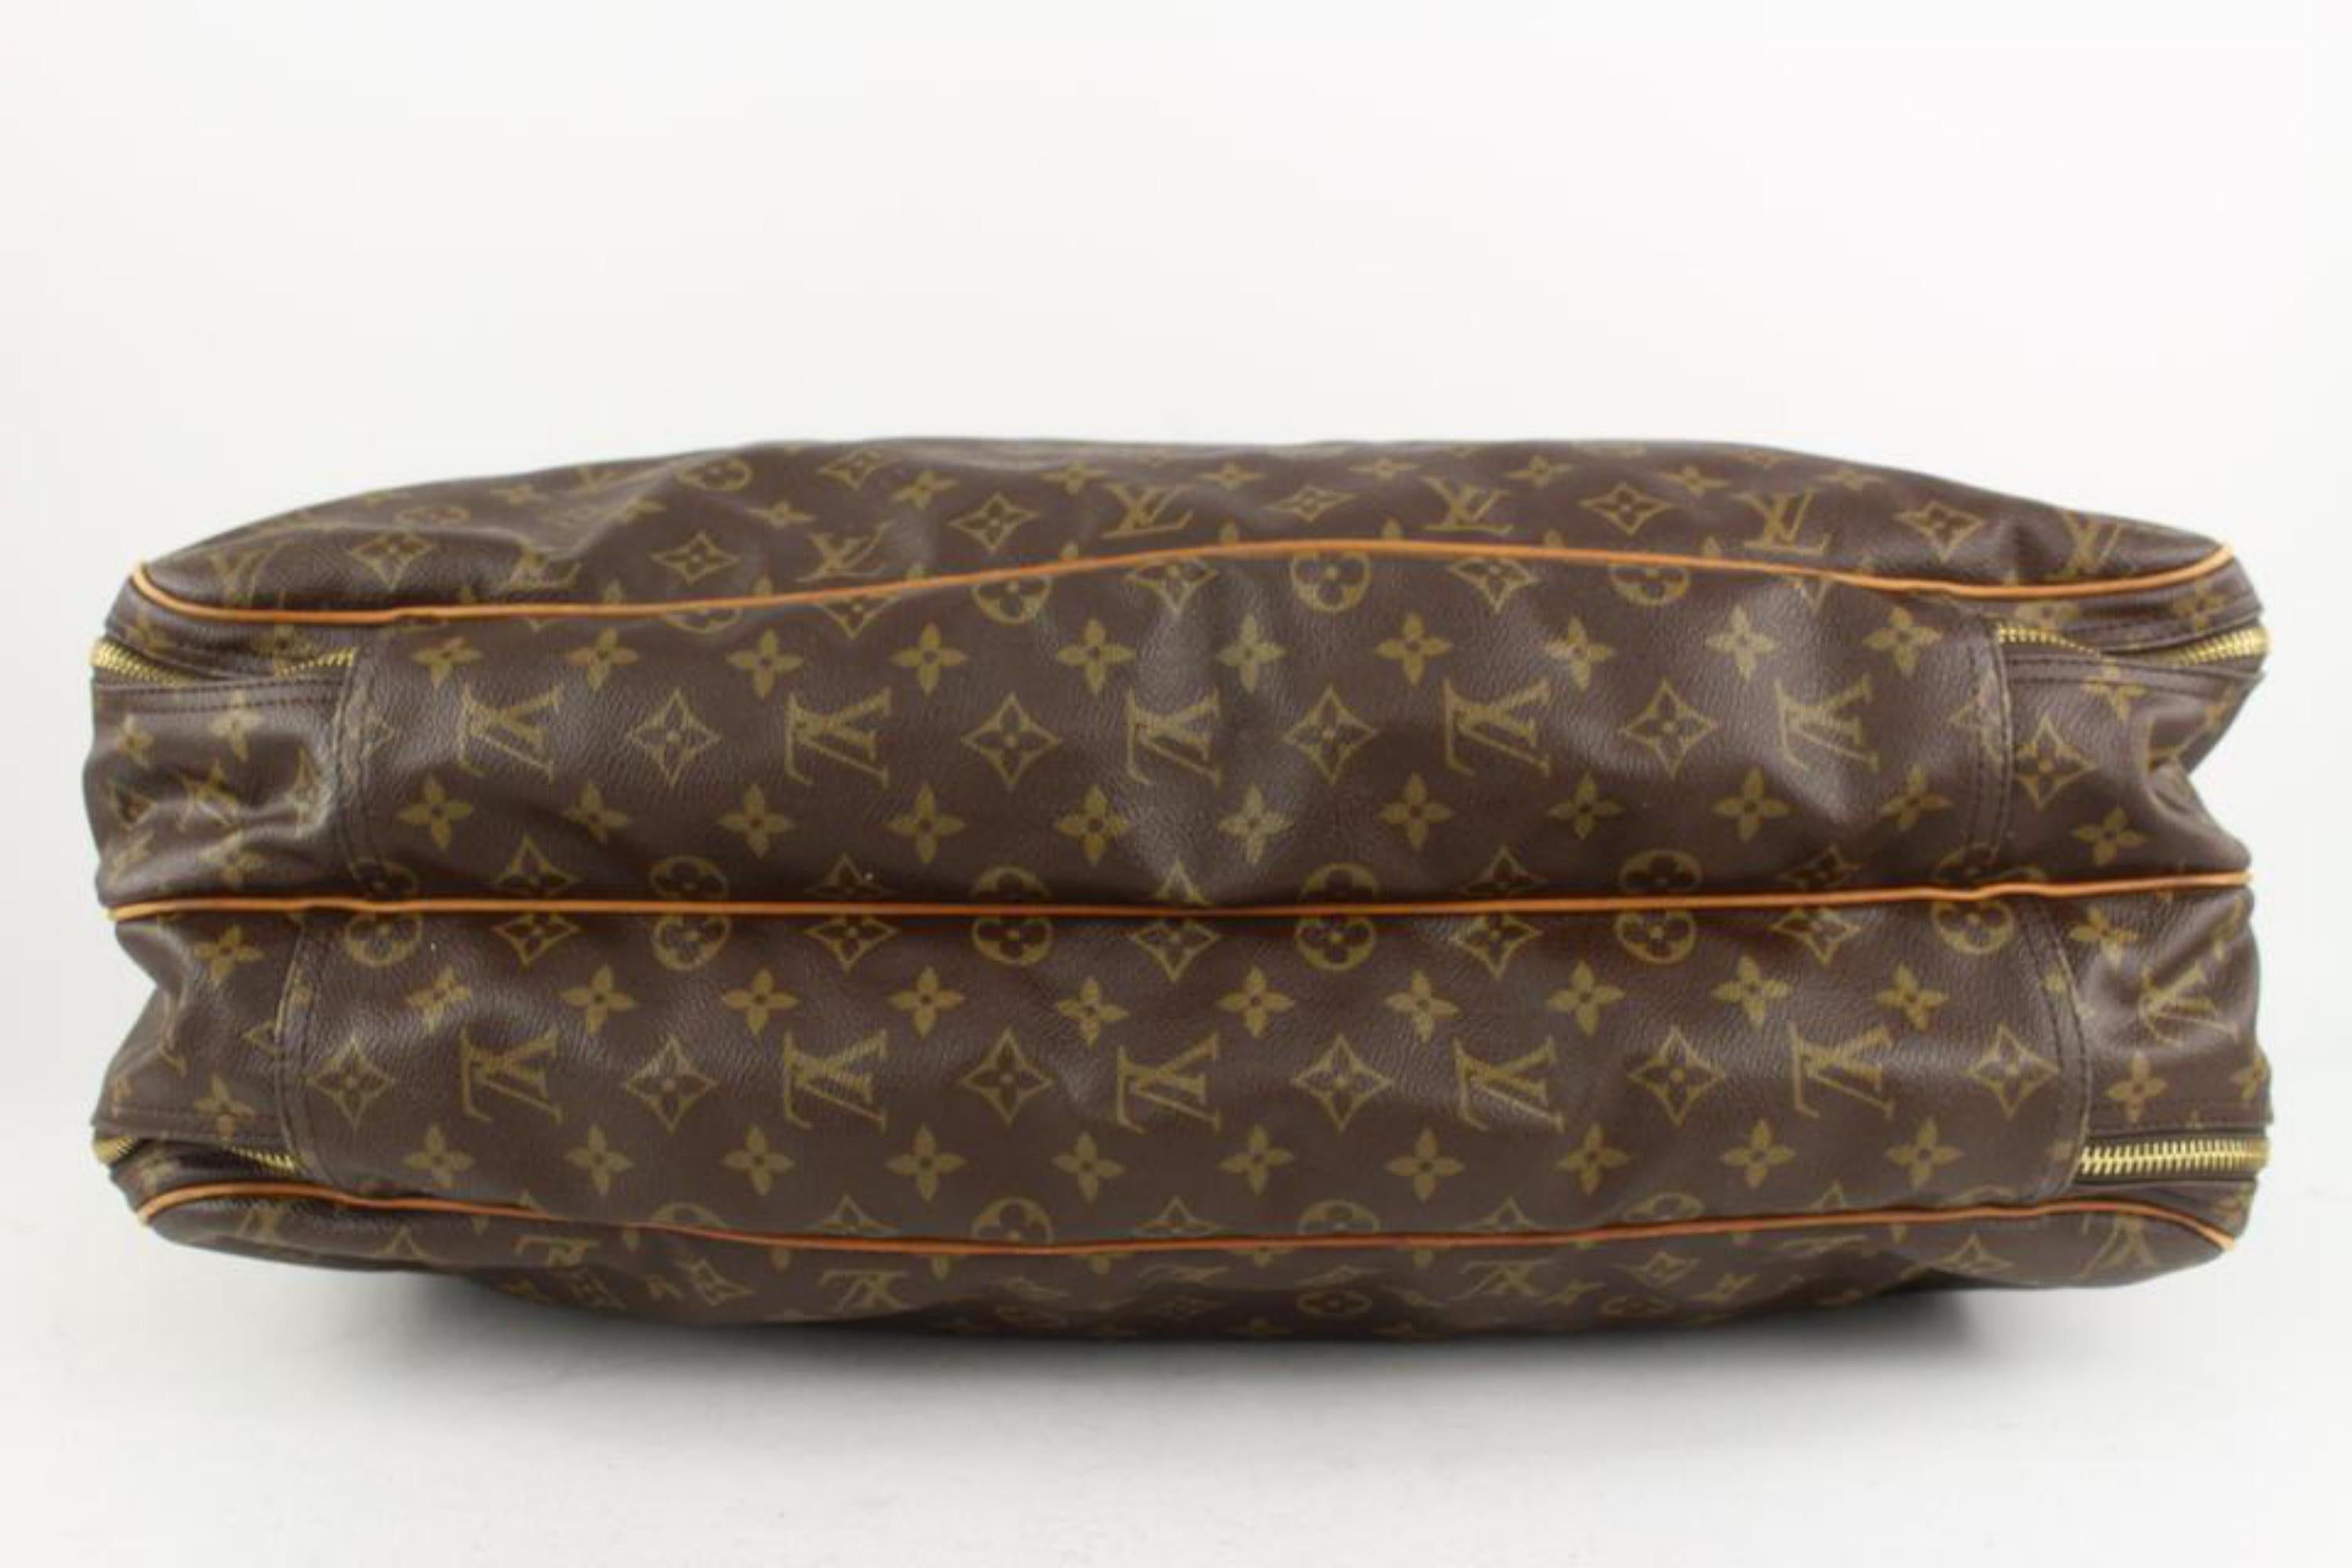 Louis Vuitton Monogram Alize 2 Poches Suitcase Luggage with Bandouliere 9lv110 In Good Condition For Sale In Dix hills, NY